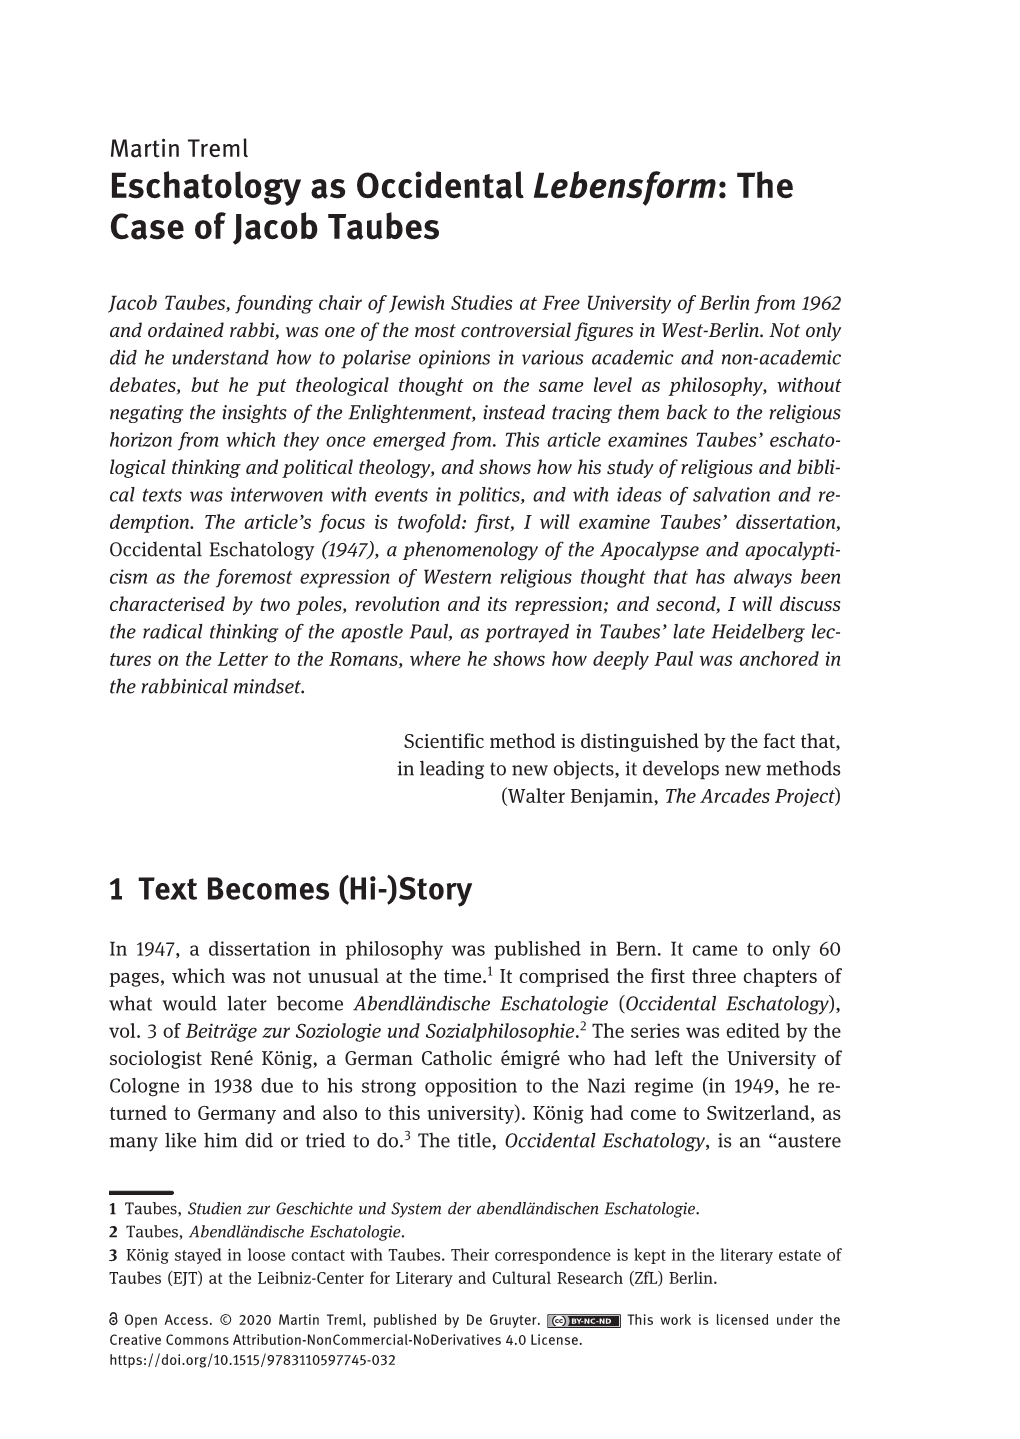 The Case of Jacob Taubes